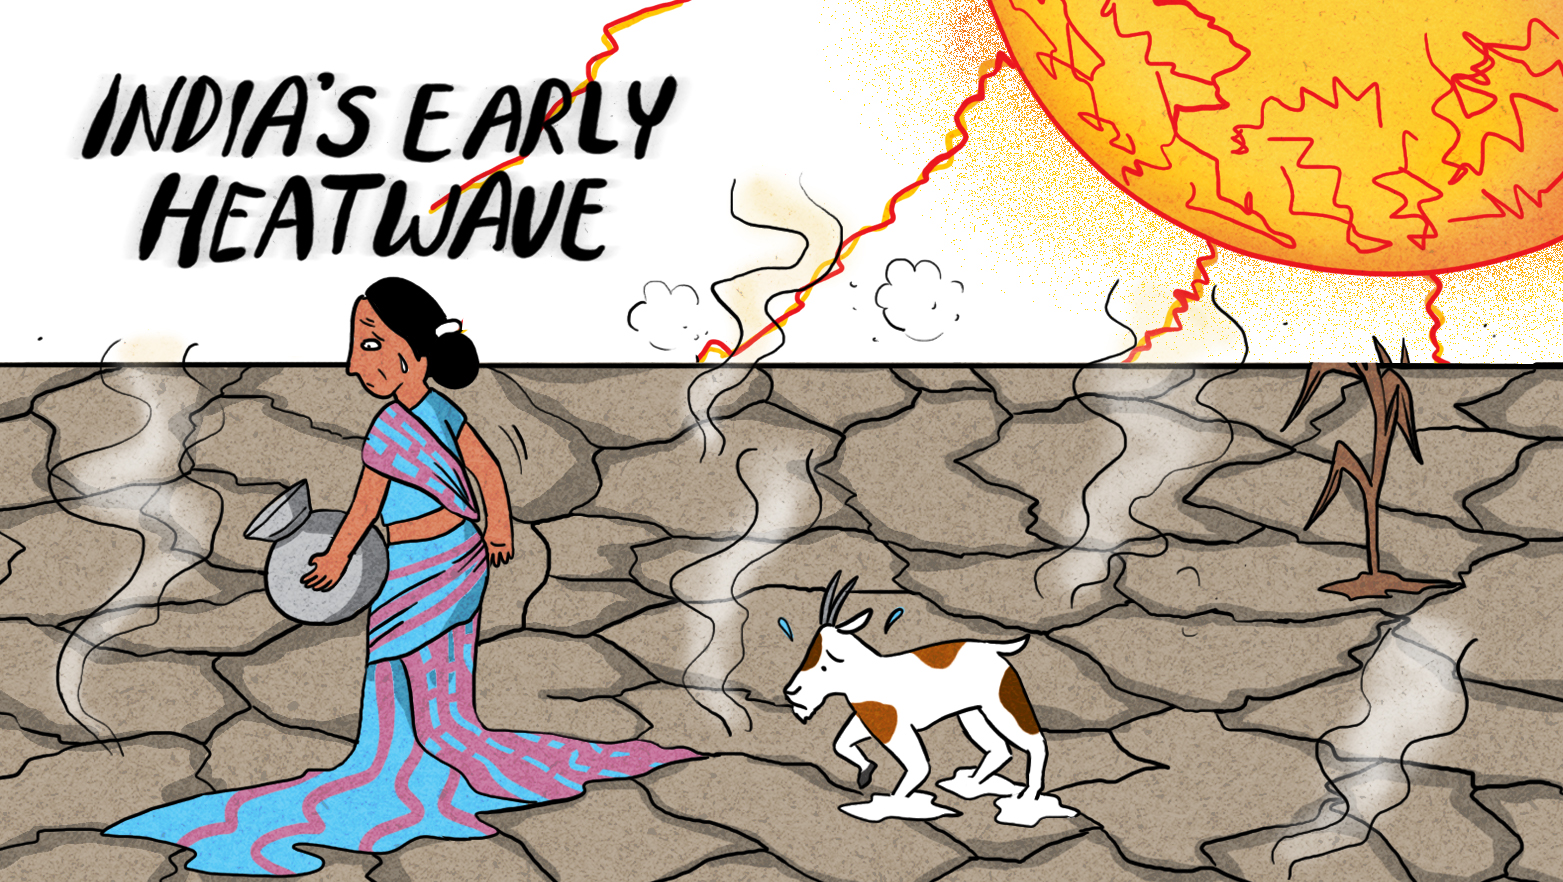 Early heatwave in India